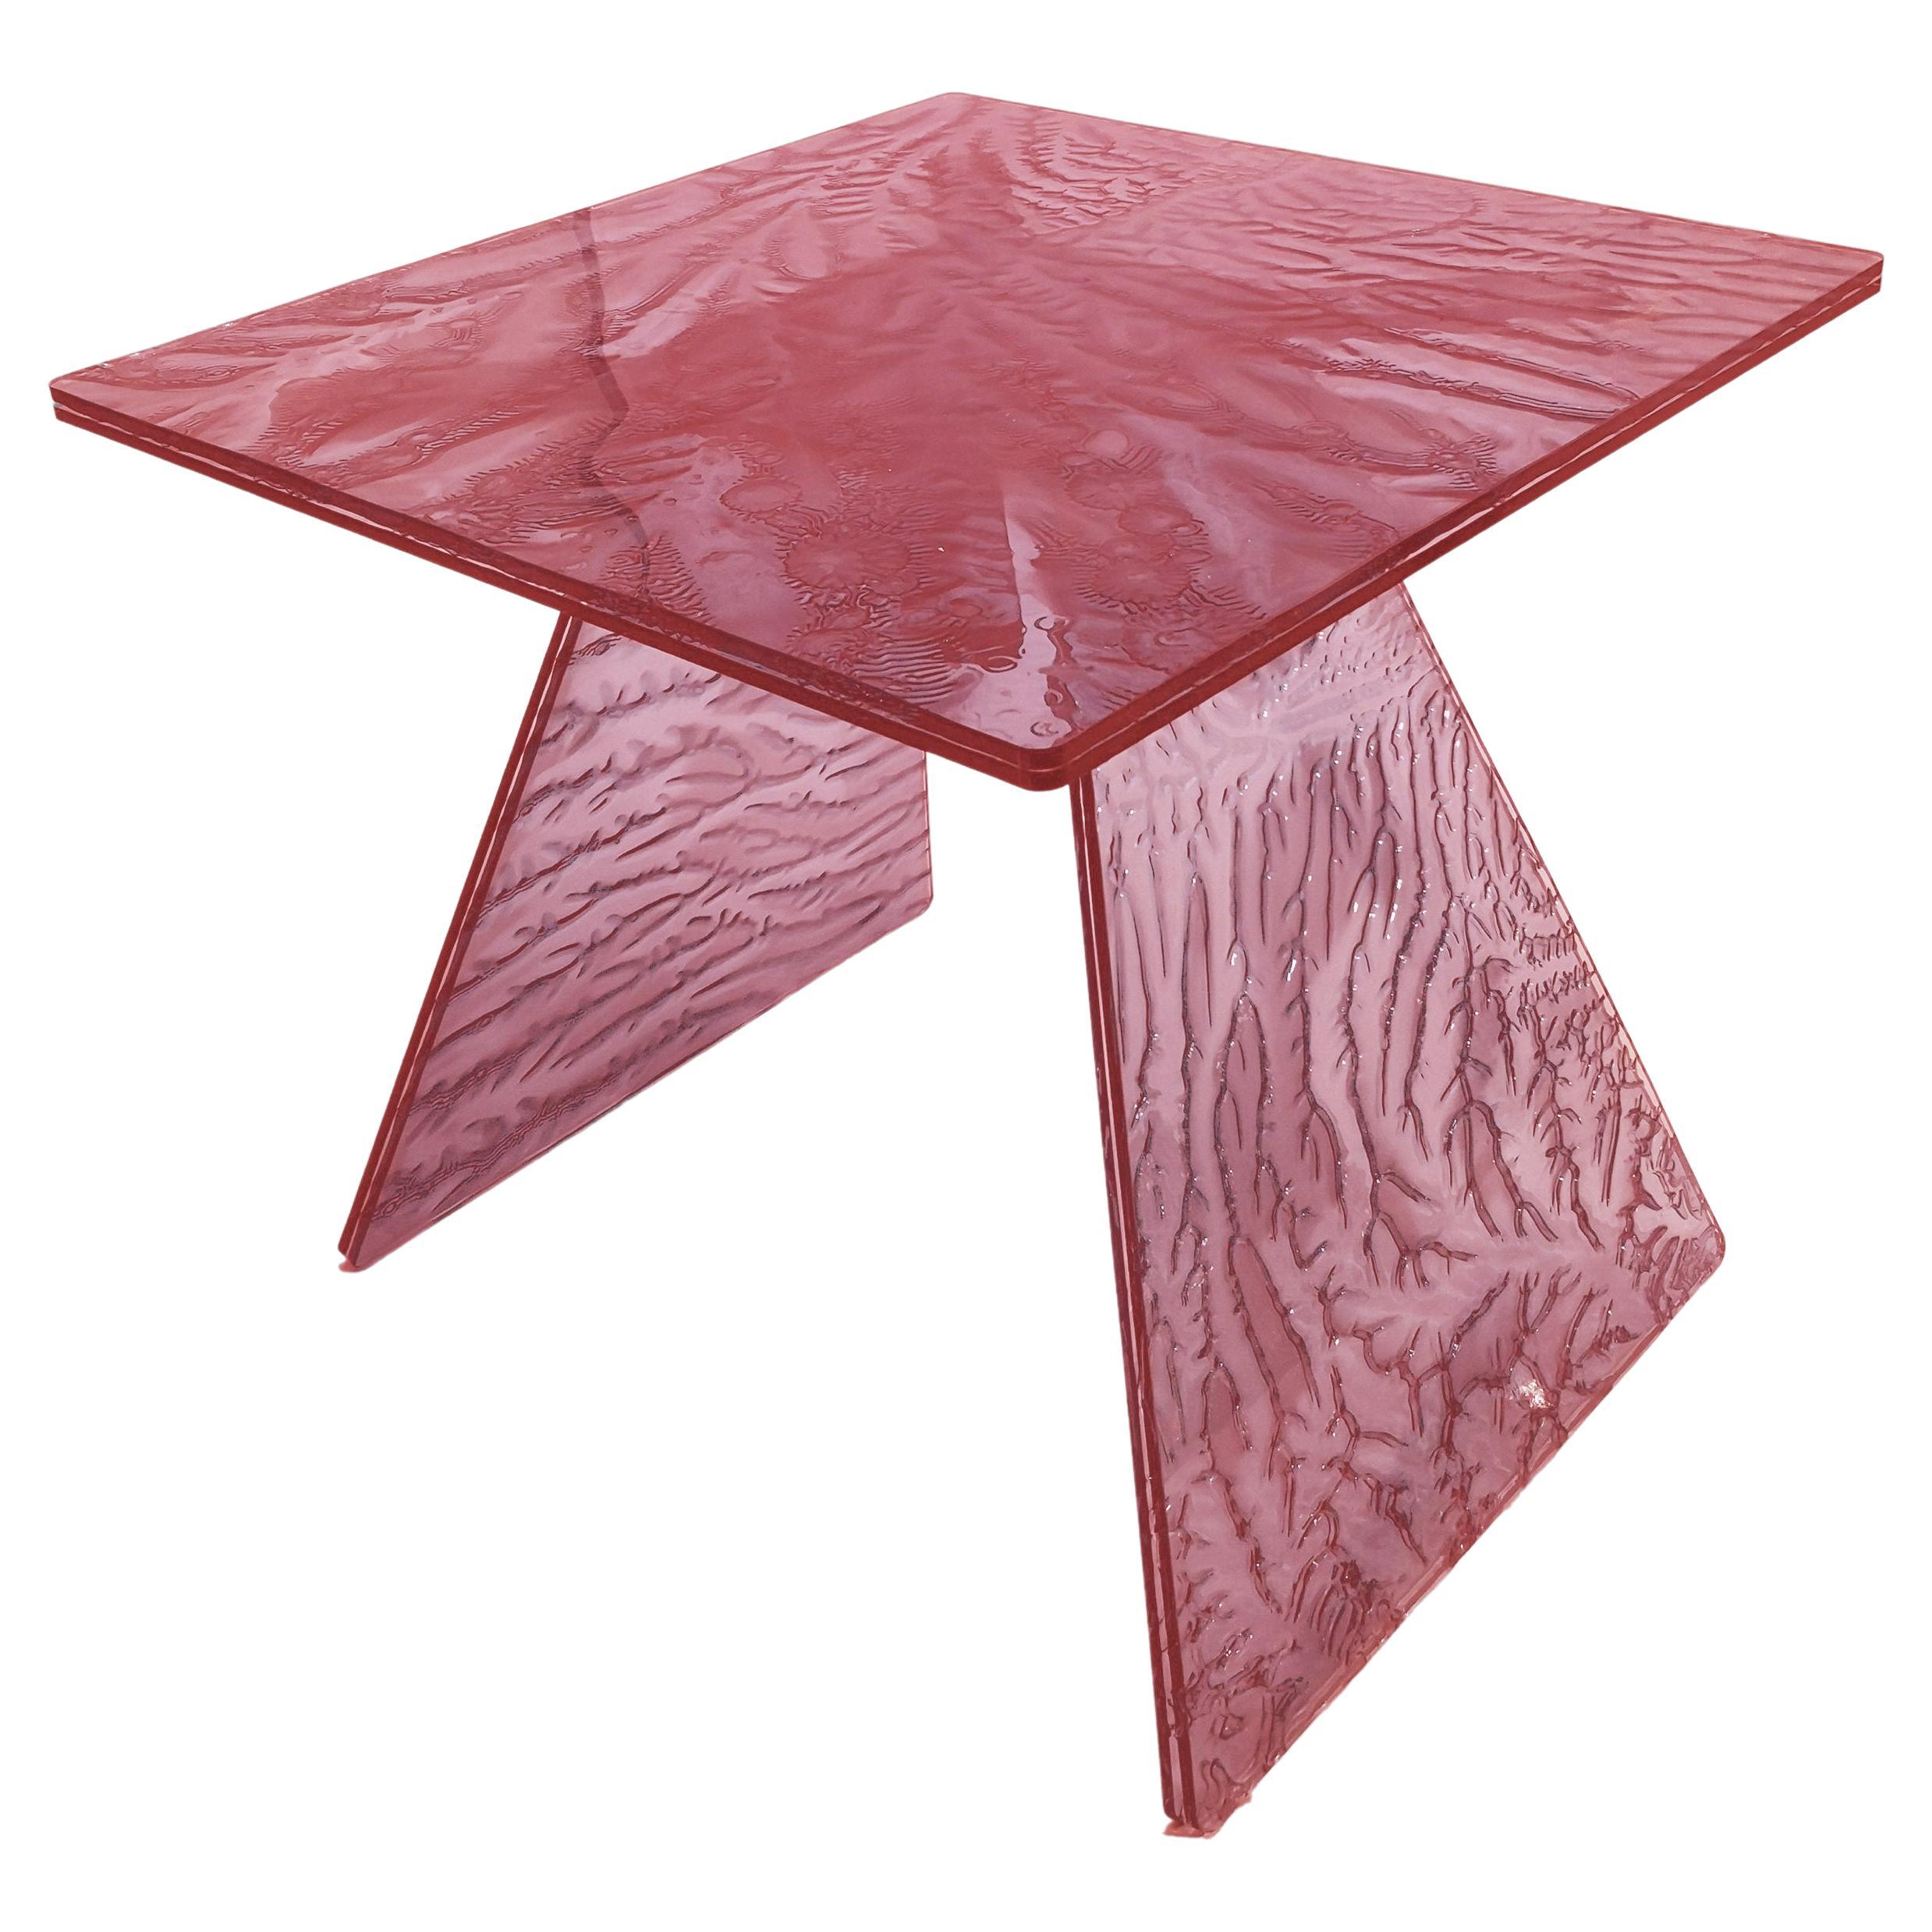 Sketch Coffee Table Made in Acrylic Pink Design Roberto Giacomucci in 2021